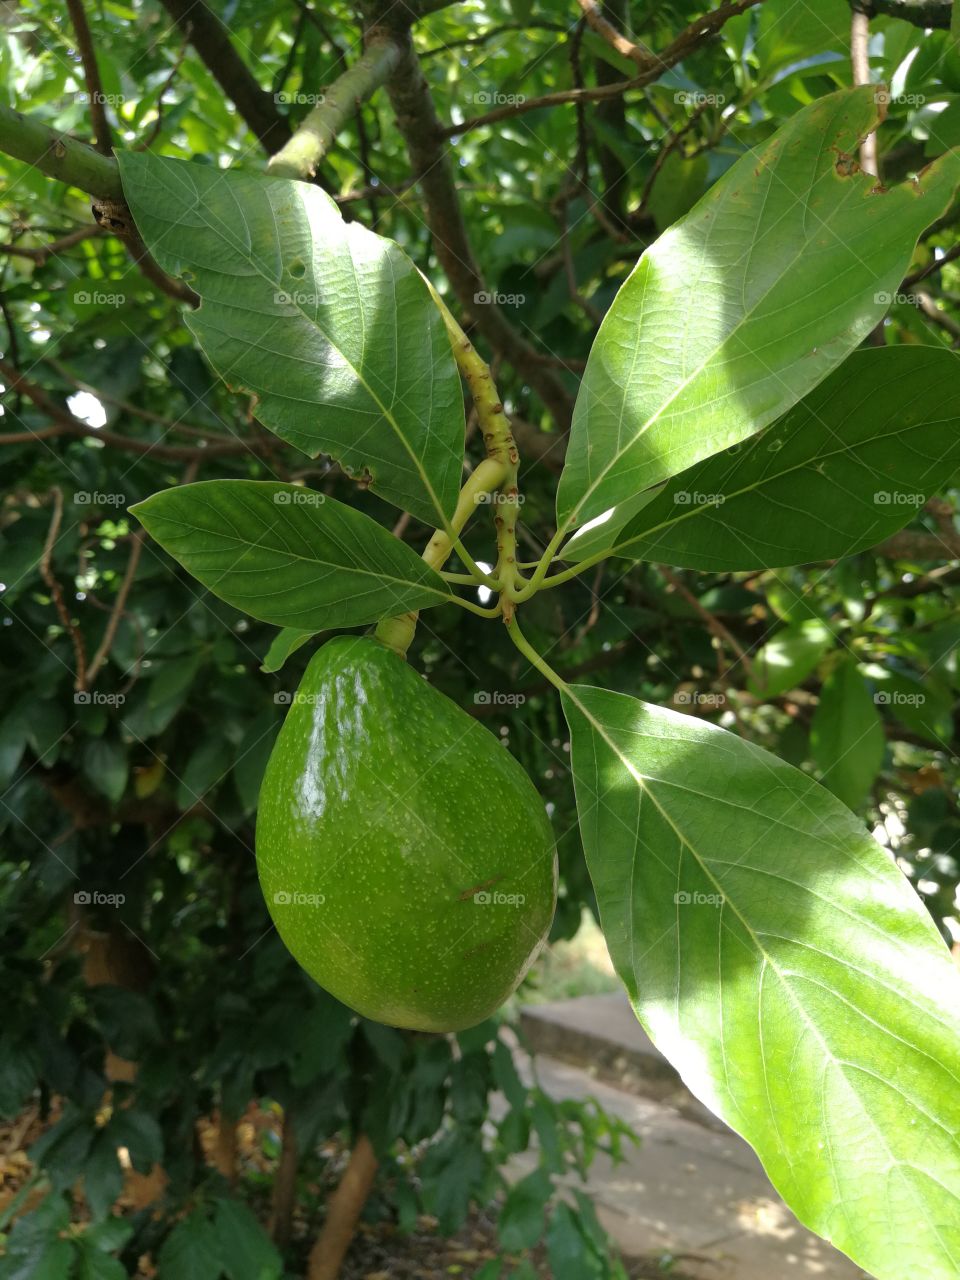 A Baby Avocado Fruit Grows Beautifully In The Tree